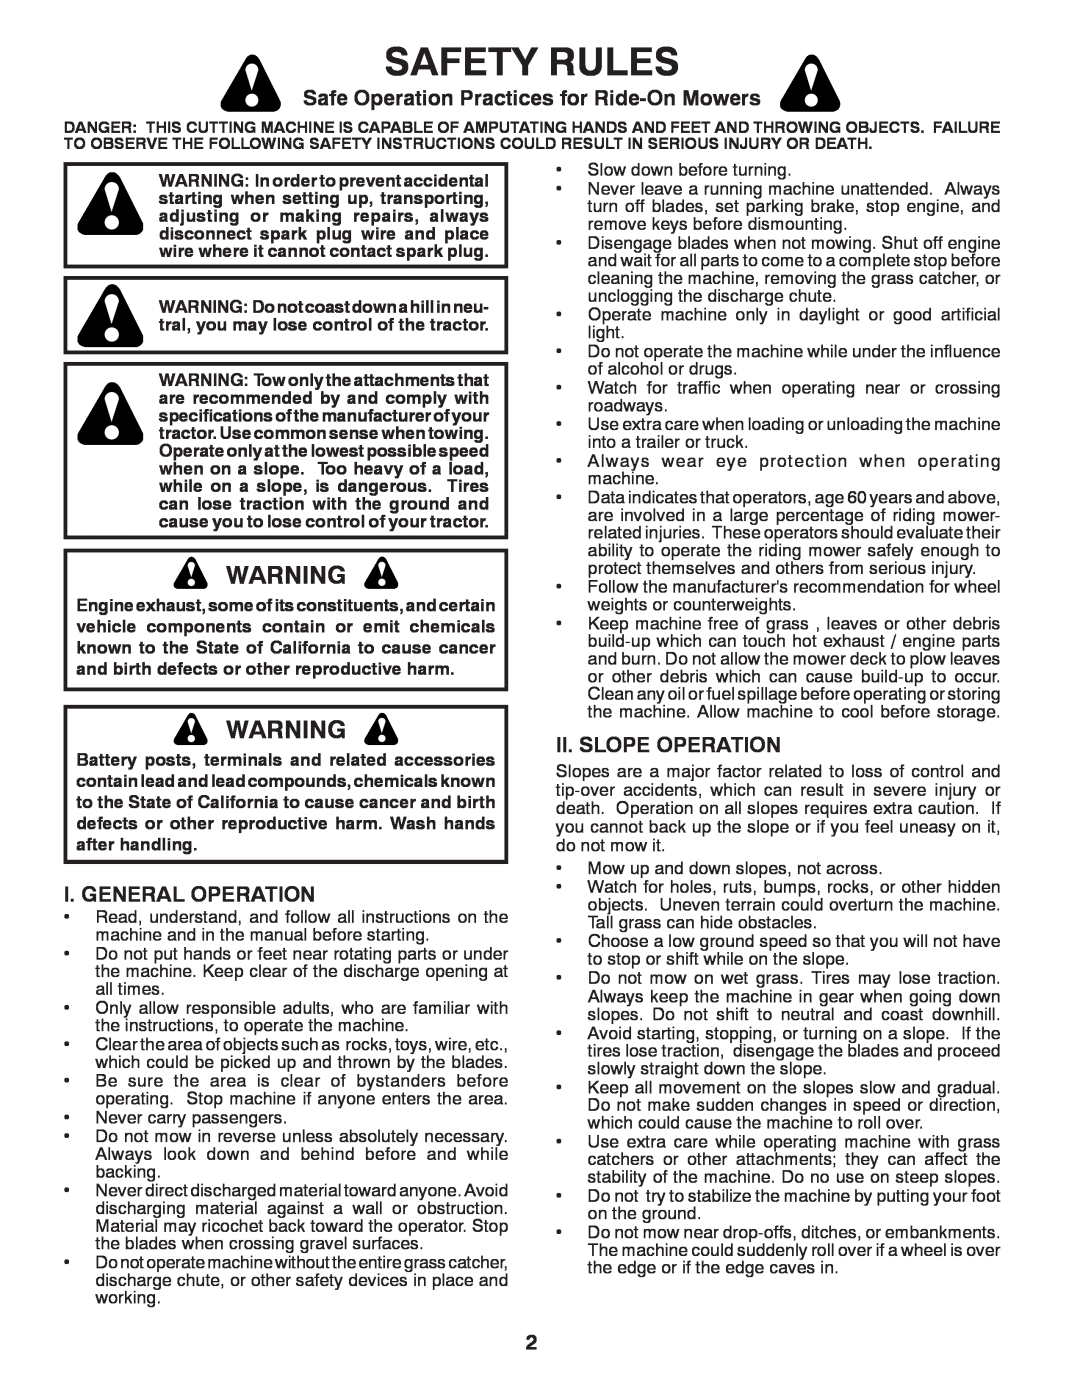 Poulan 96042010703 Safety Rules, Safe Operation Practices for Ride-On Mowers, I. General Operation, Ii. Slope Operation 